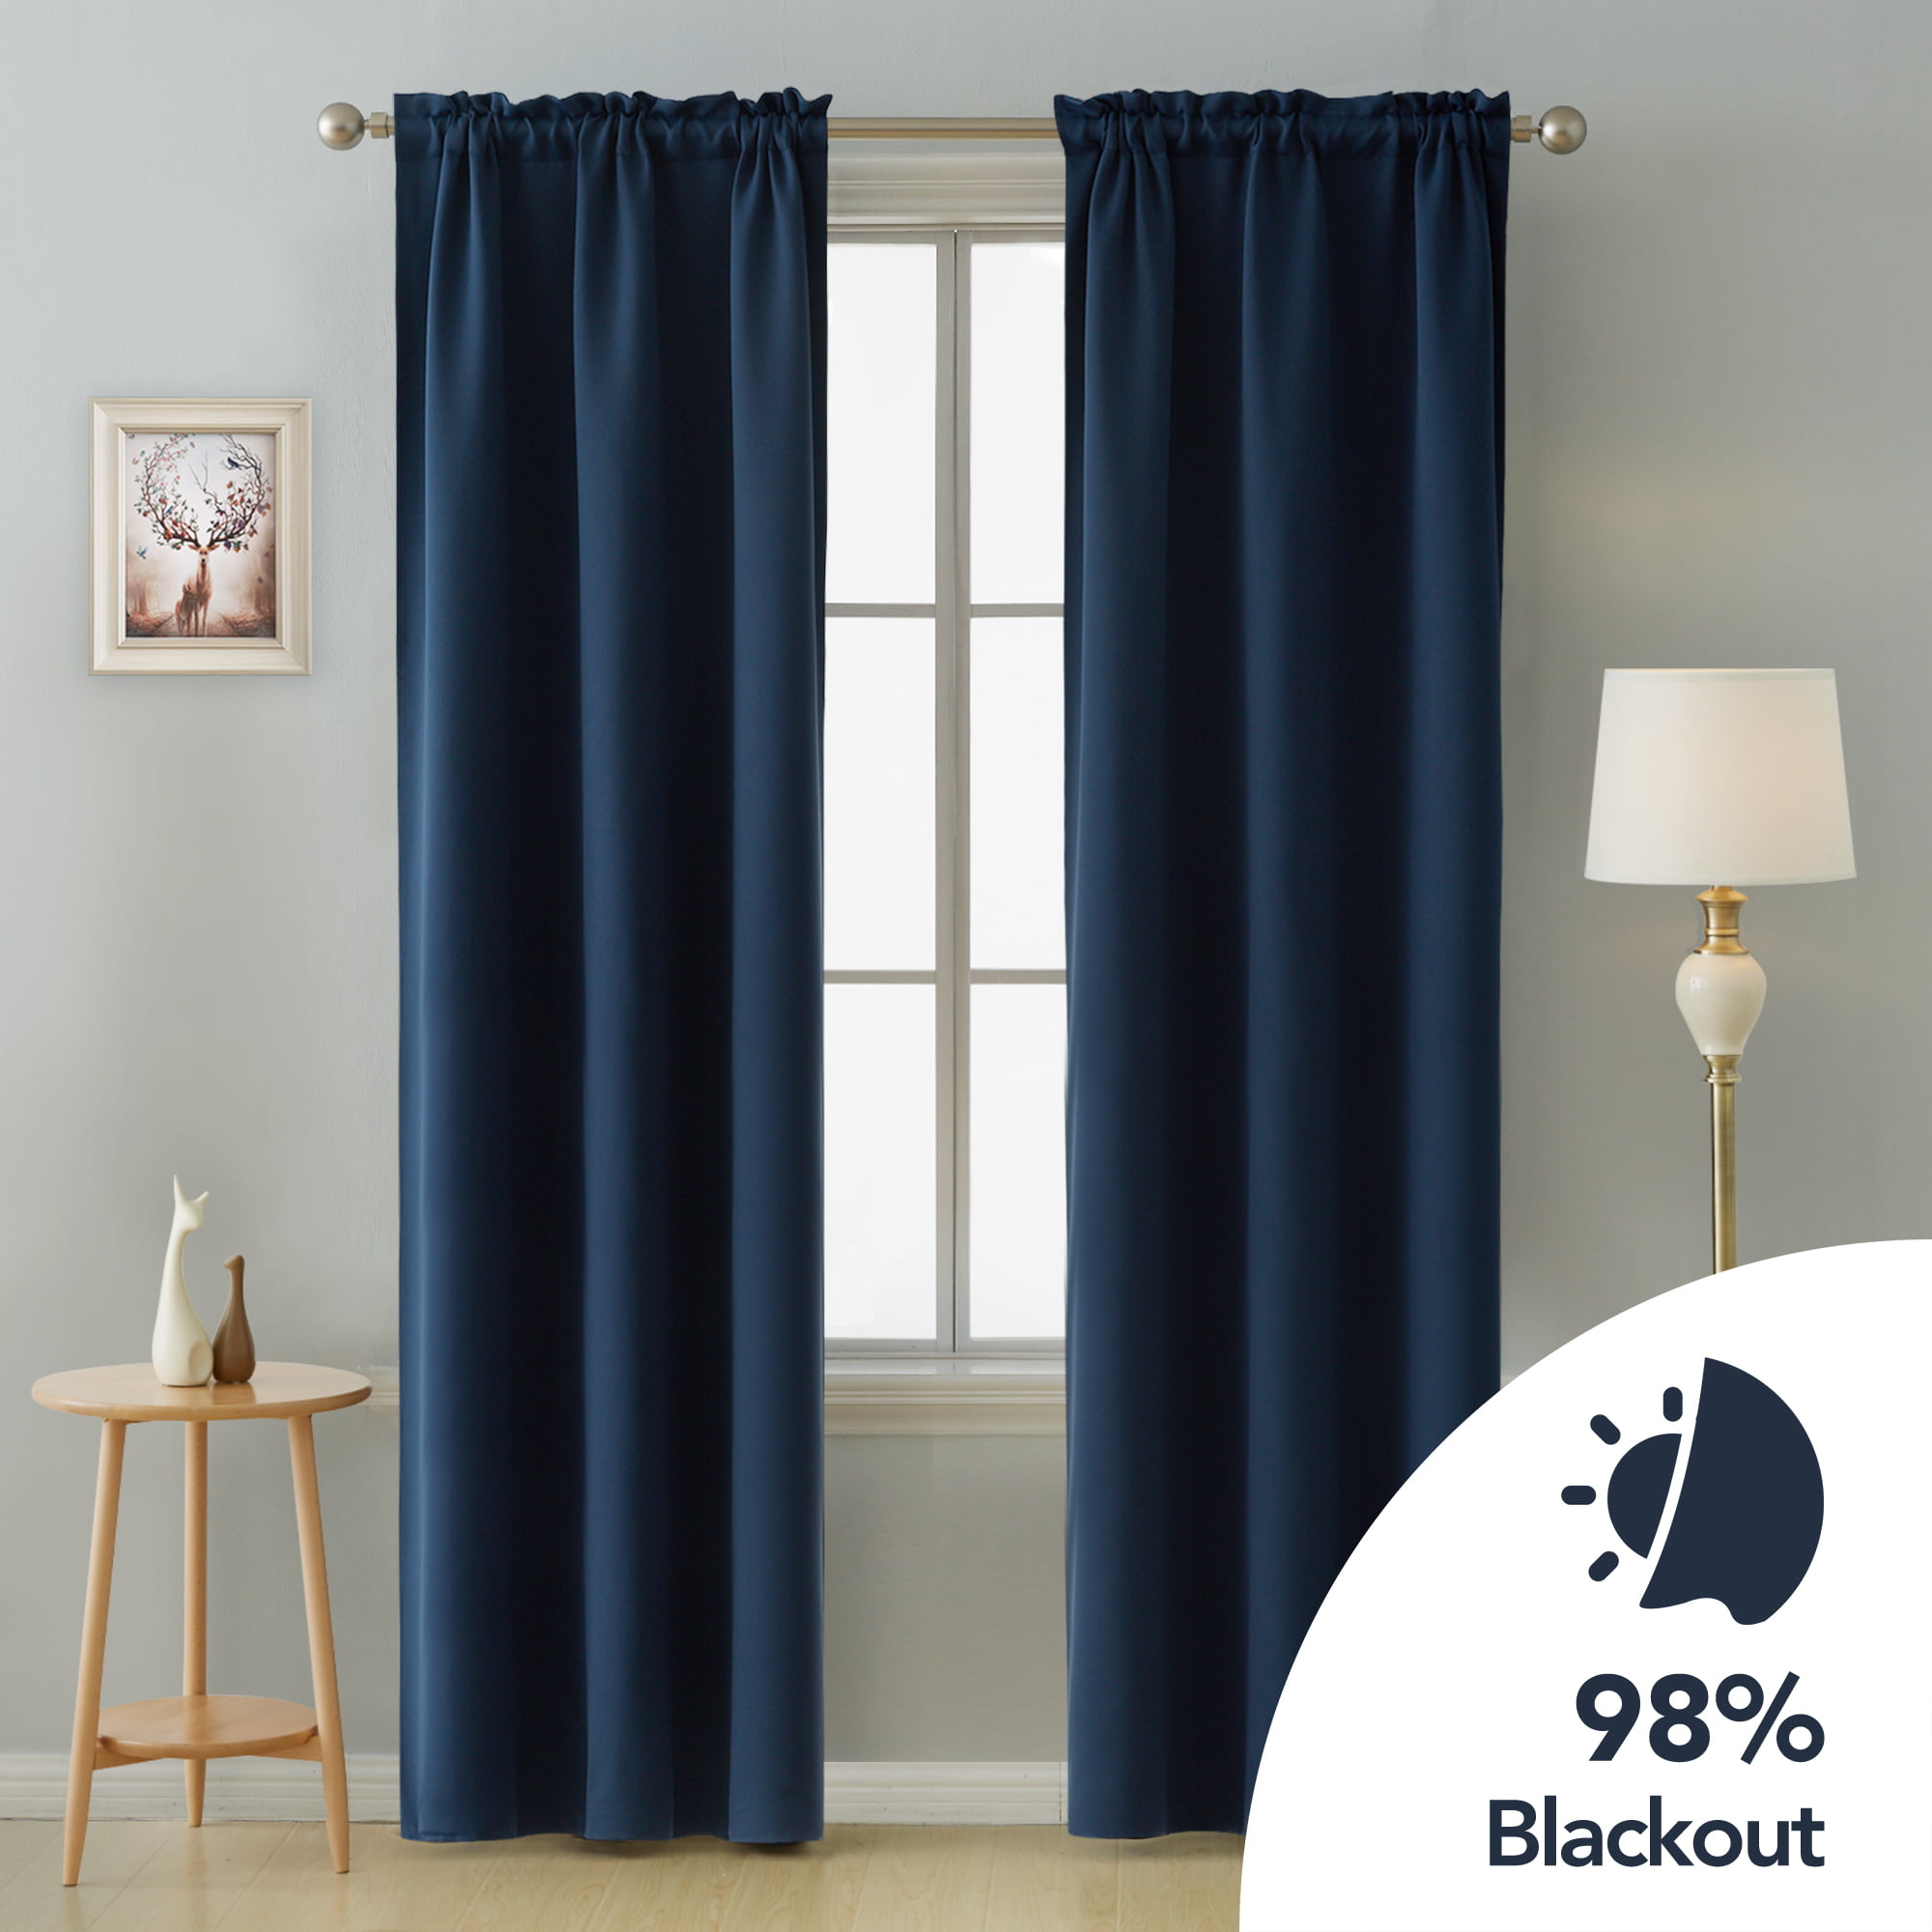 Deconovo Blackout Curtains Room Darkening Thermal Insulated Curtain Panels Rod Pocket for Living Room Baby Blue 38 x 45 Inch 2 Panels